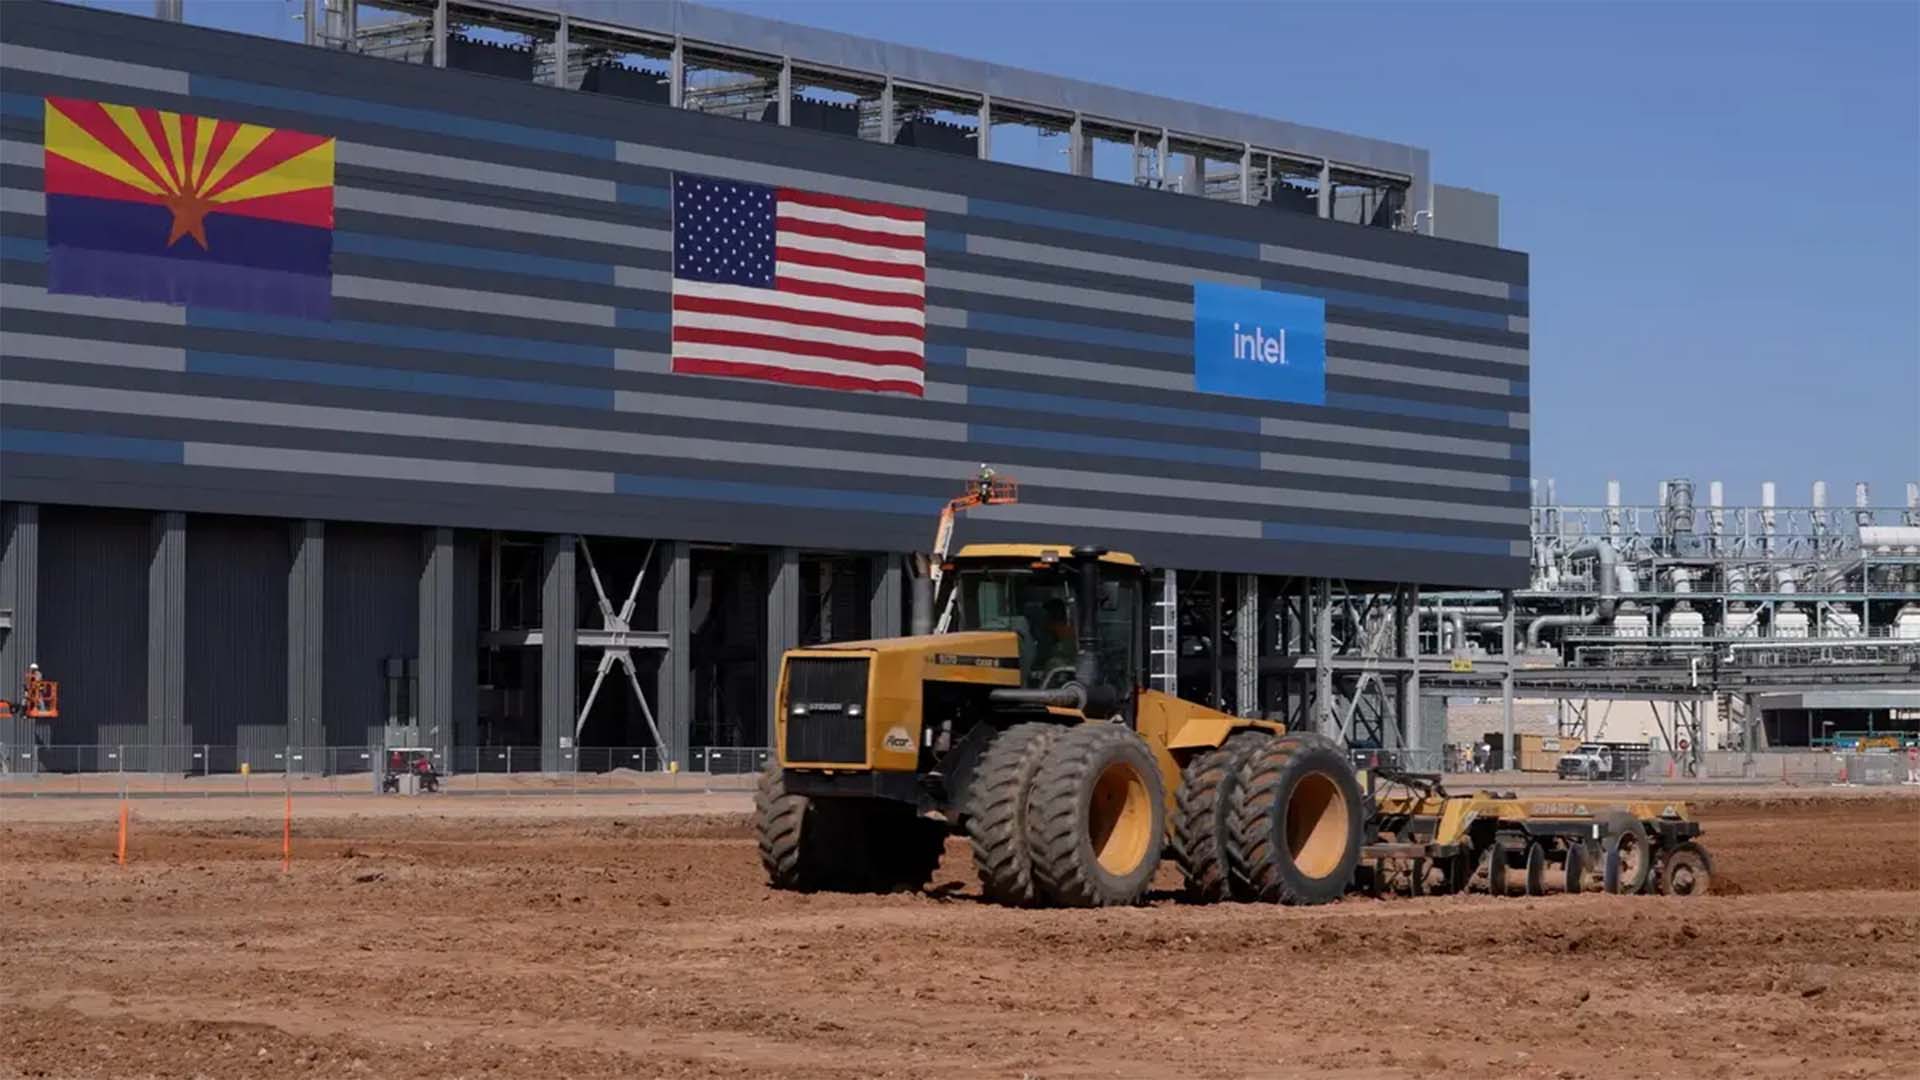 Intel's new semiconductor facility started construction